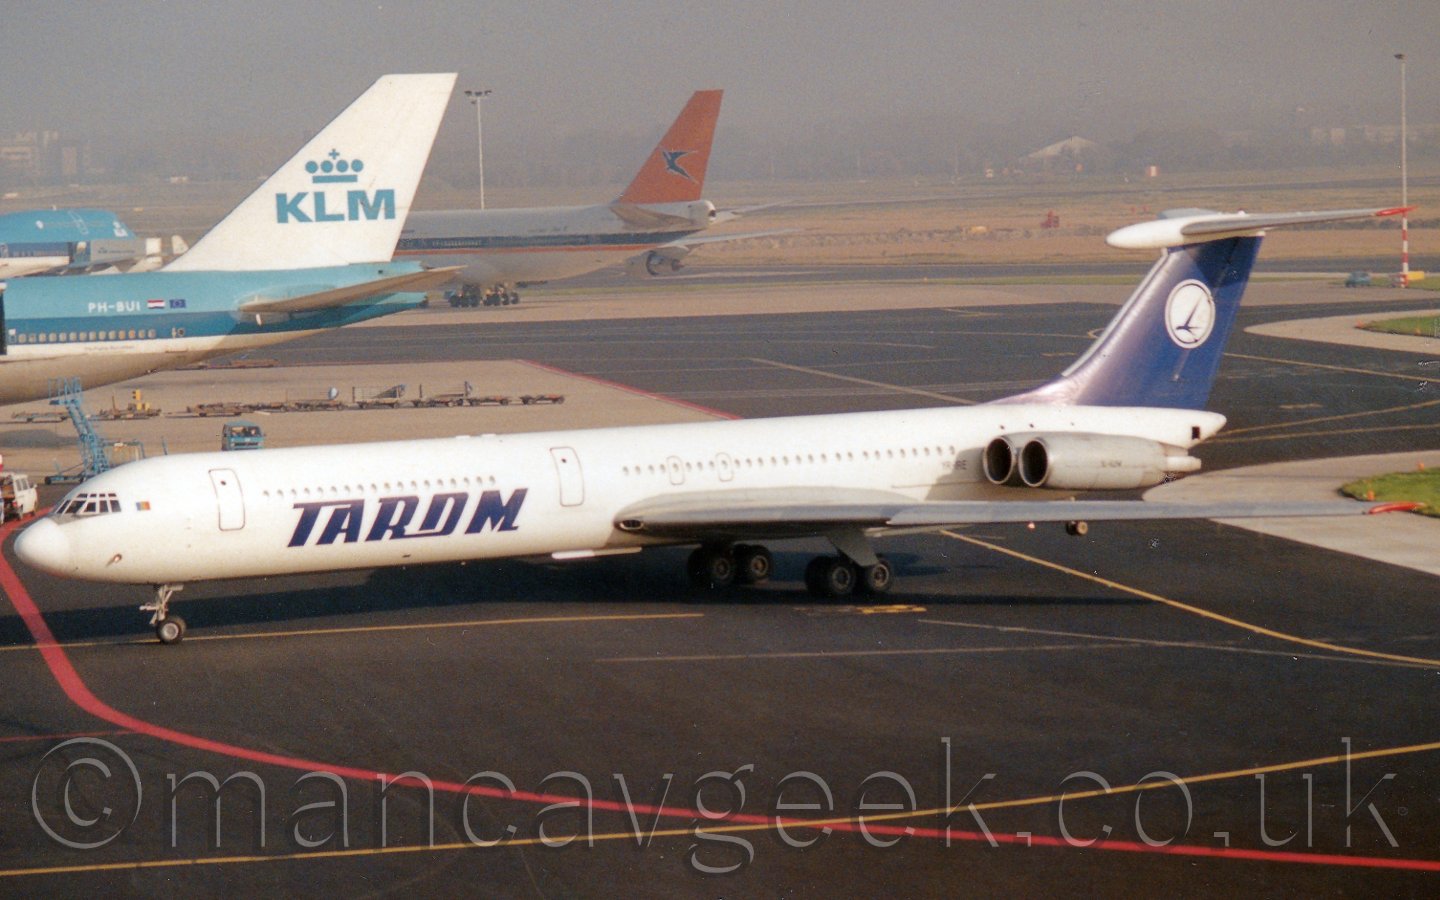 Side view of a T-tailed, 4 engined jet airliner, with the engines mounted on the rear fuselage. The planes body is mostly white, with a black patch over the top of the nose, directly in front of the cockpit, and large "Tarom" titles on the lower forward fuselage. The tail is blue, with a white circle overlaid with the stylised image of a flying bird. In the background, 3 very large 4 engined jet airliners are clustered together in the top left corner, the rest of the image being a view across the airfield before vanishing in to haze in the distance.